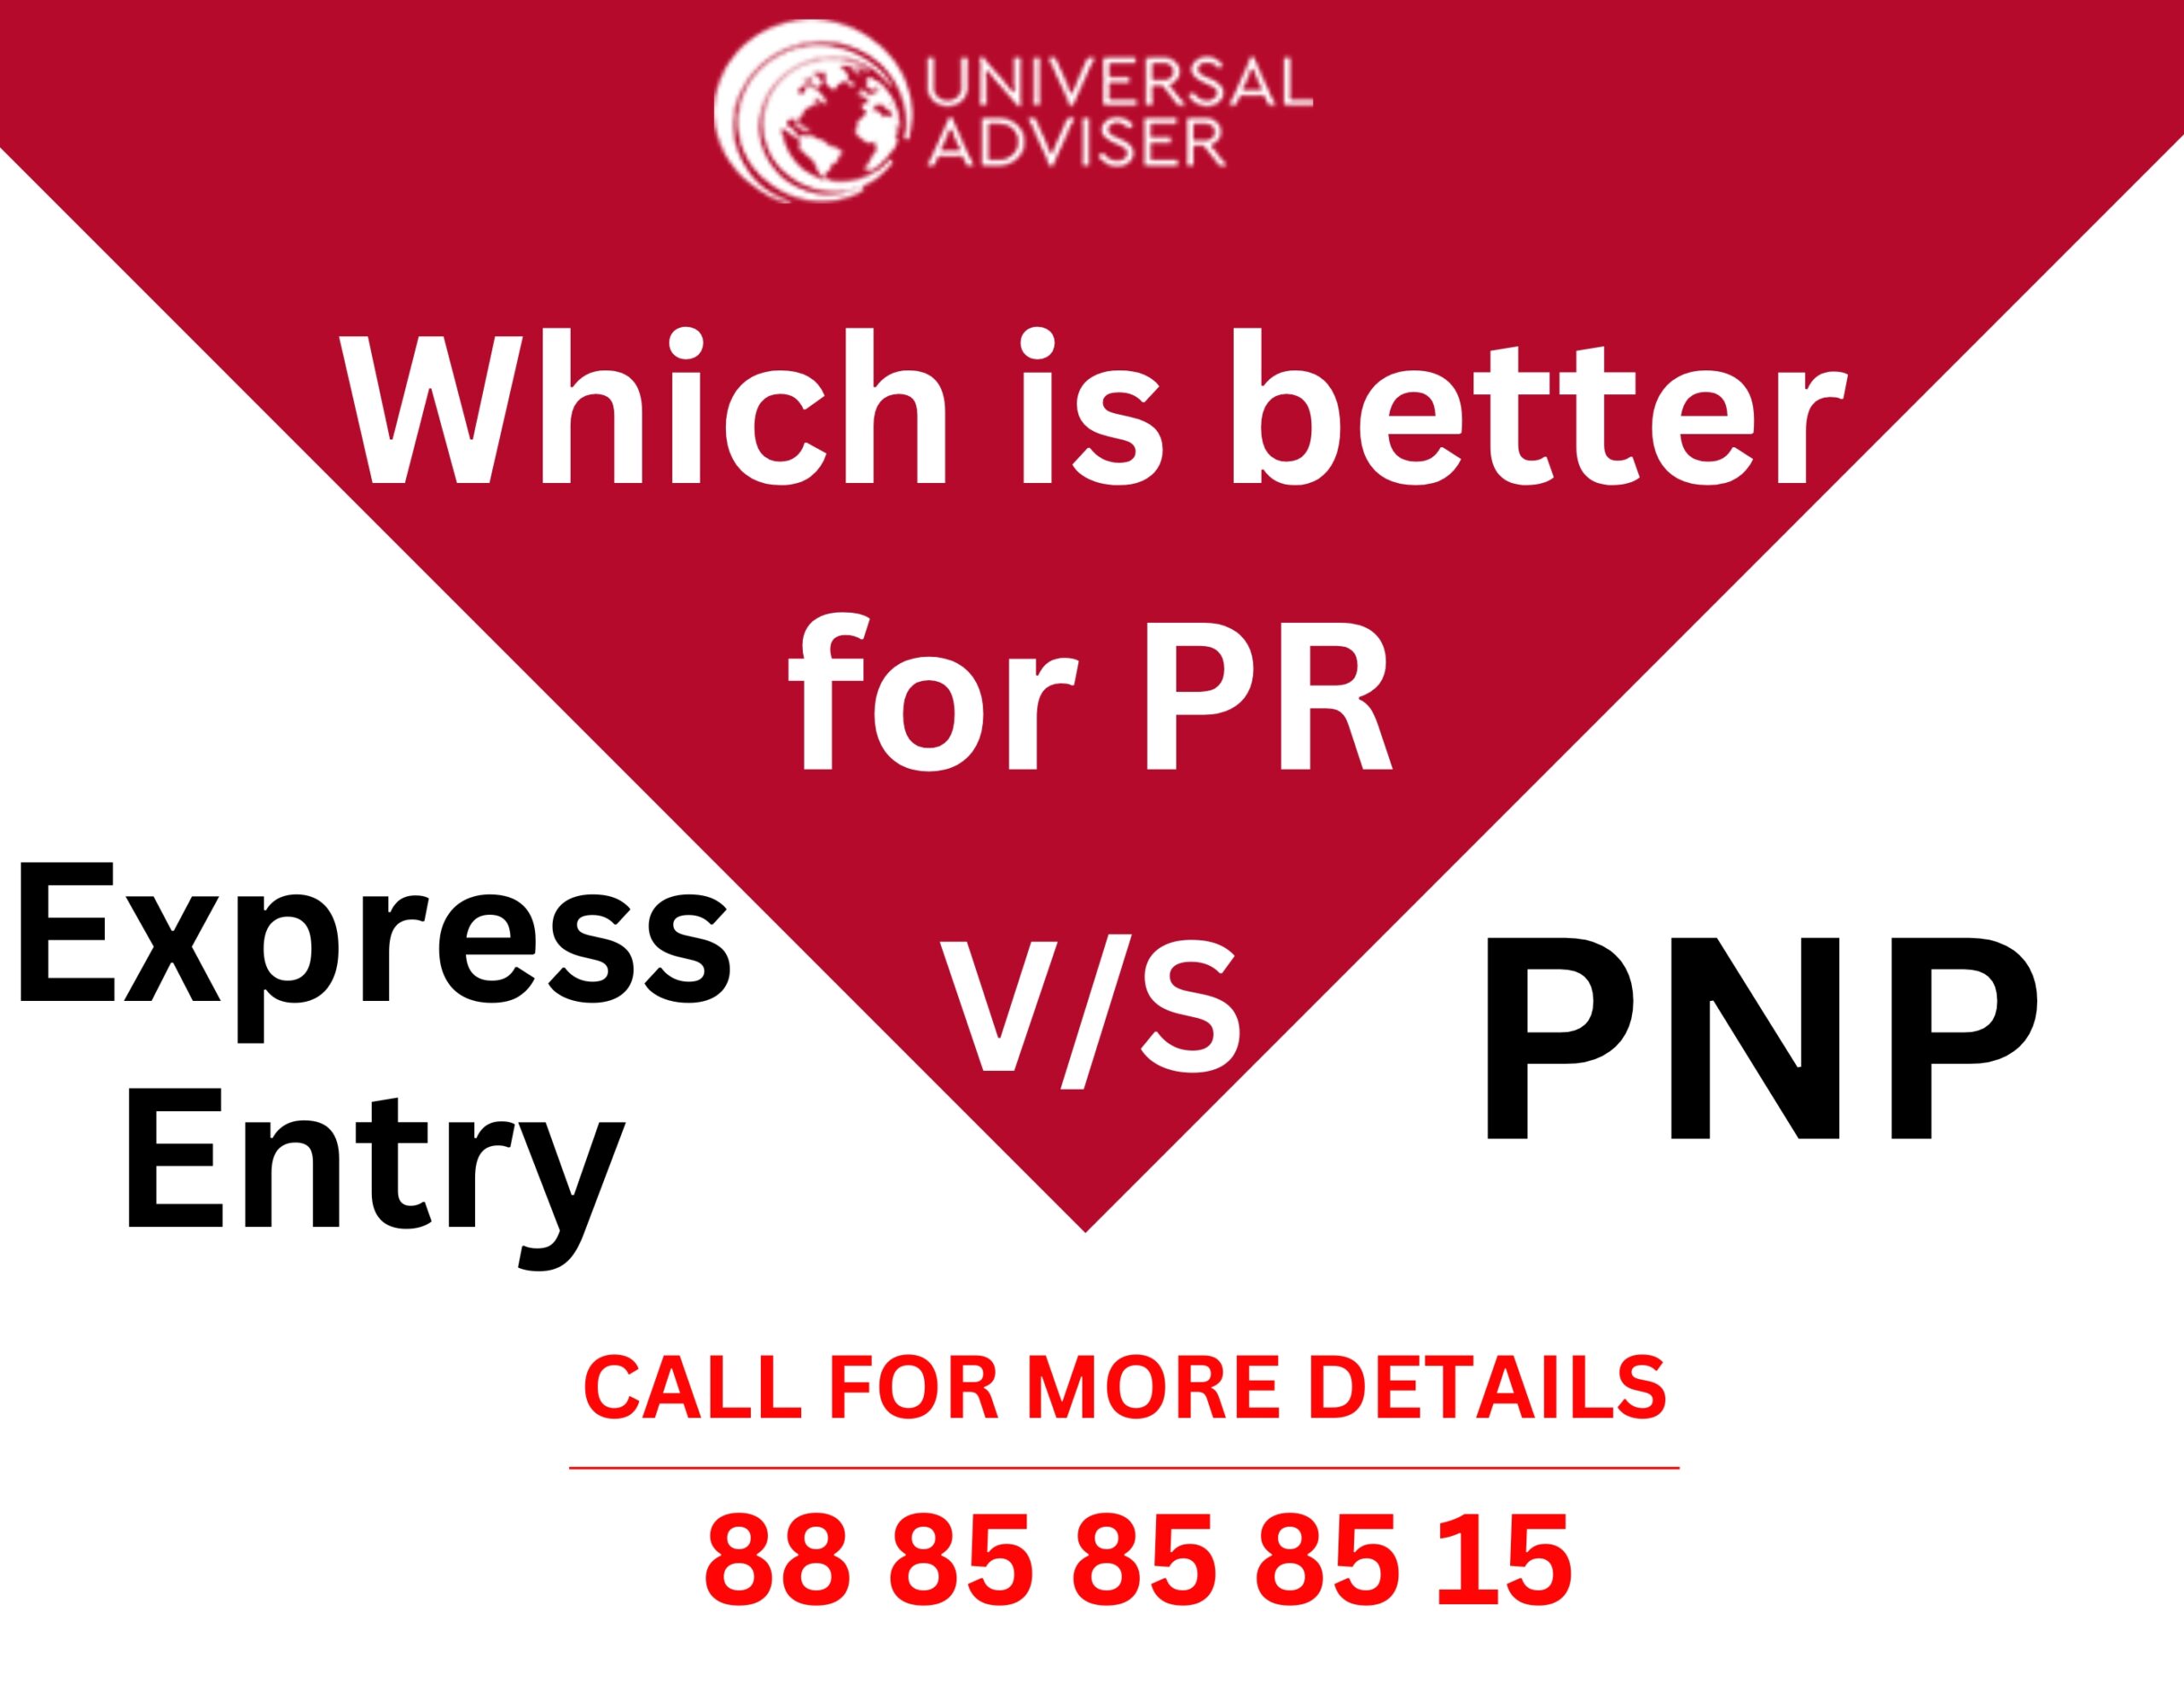 Express Entry vs. PNP Which is better for PR